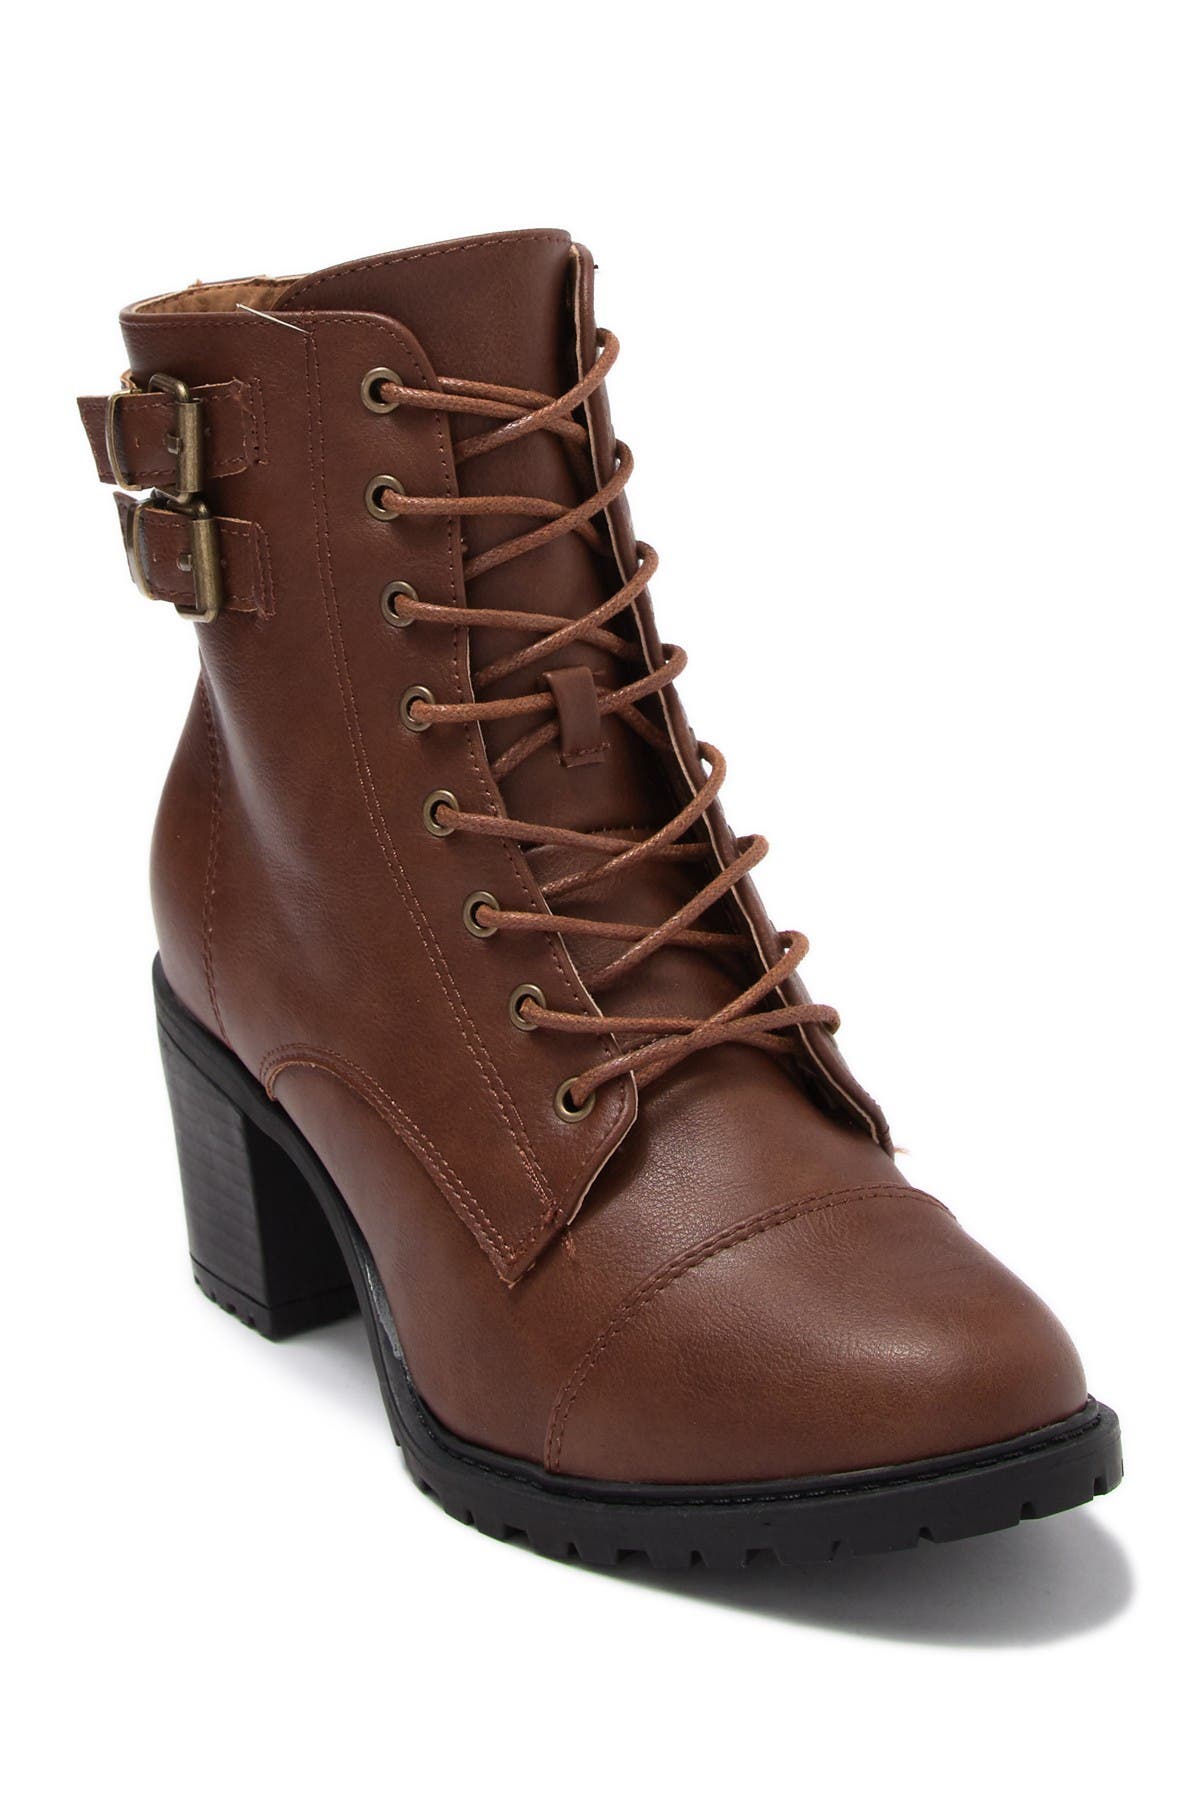 enzo boots nordstrom